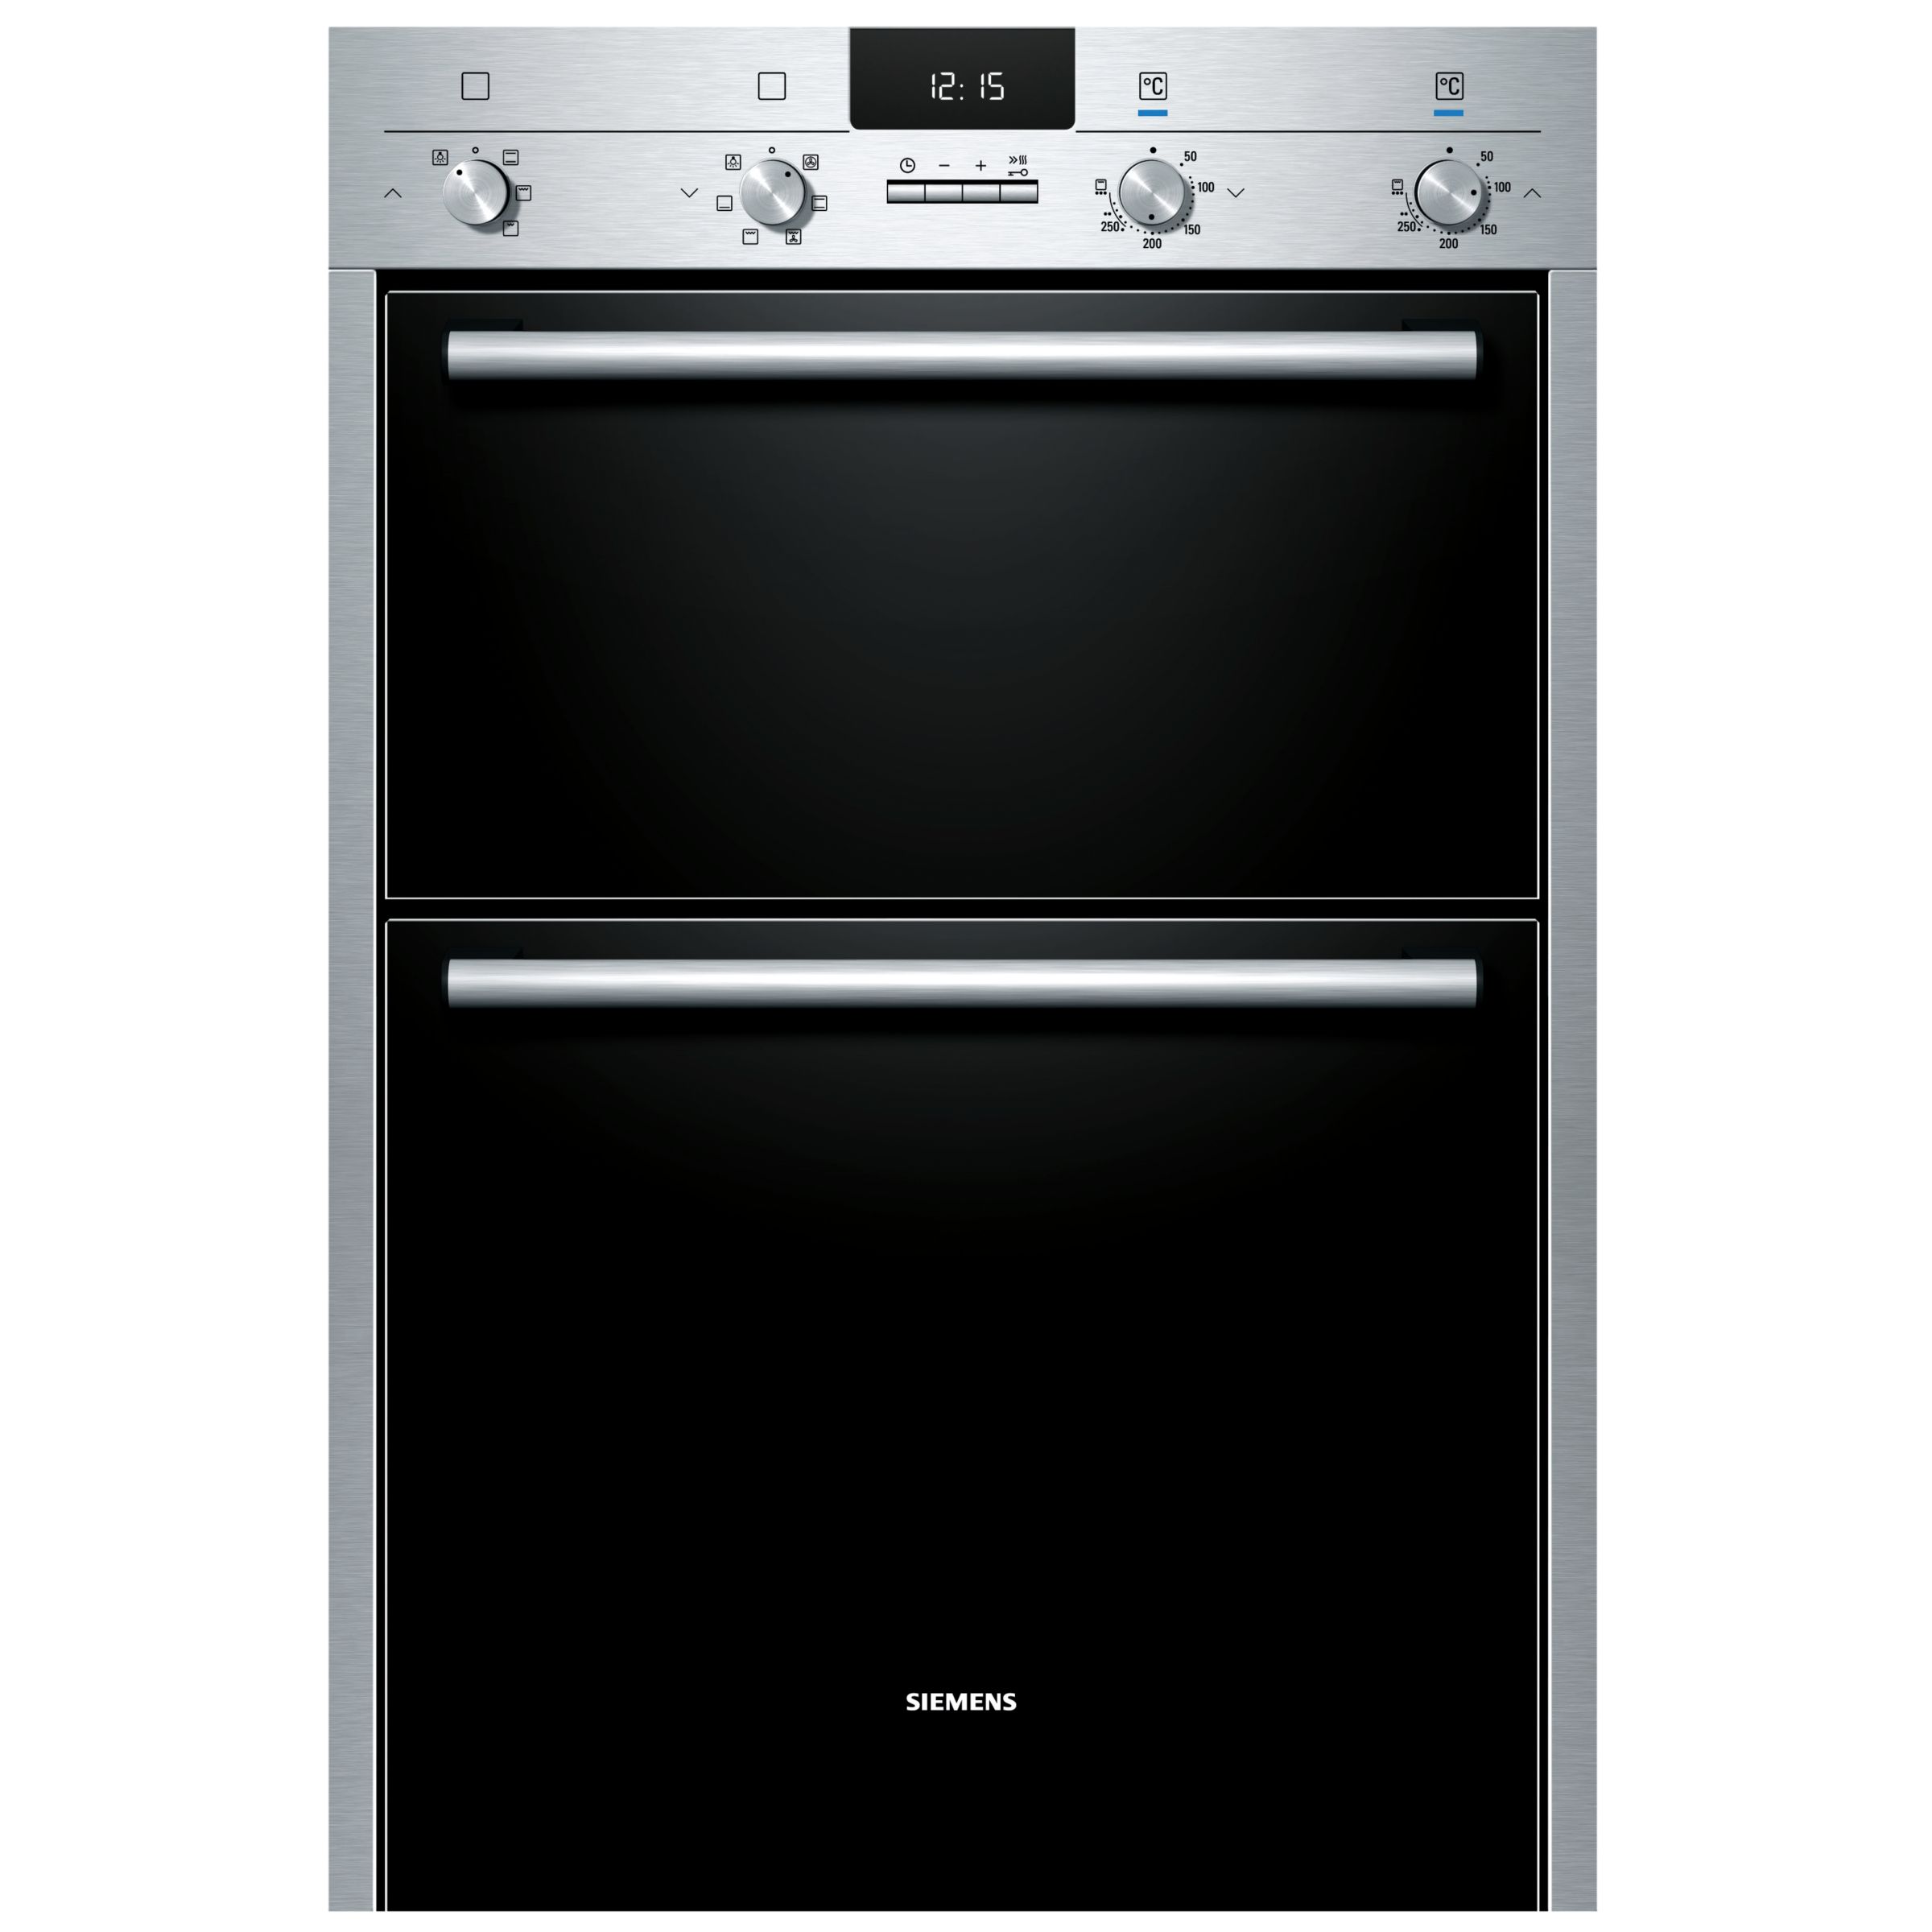 Siemens HB43MB520B Double Electric Oven, Stainless Steel at John Lewis